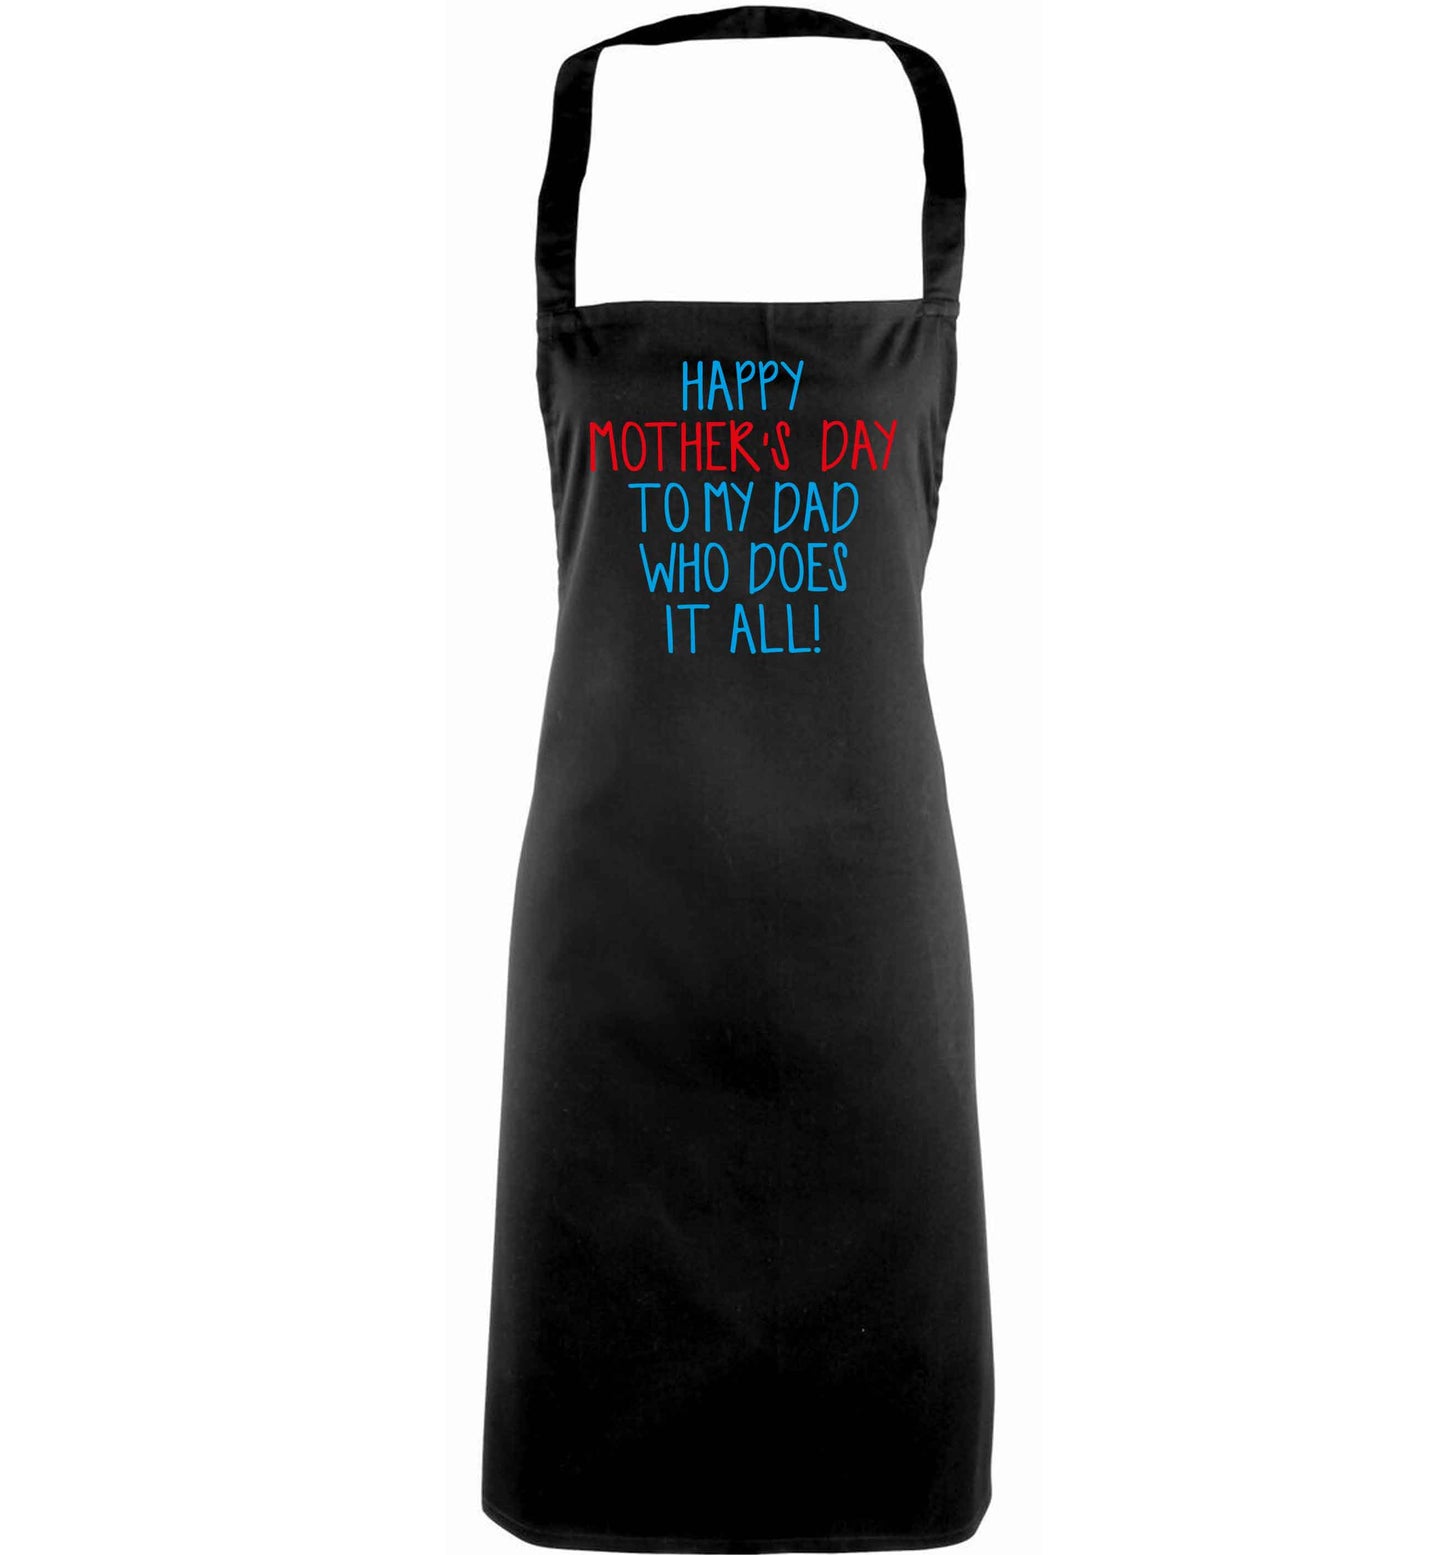 Happy mother's day to my dad who does it all! adults black apron